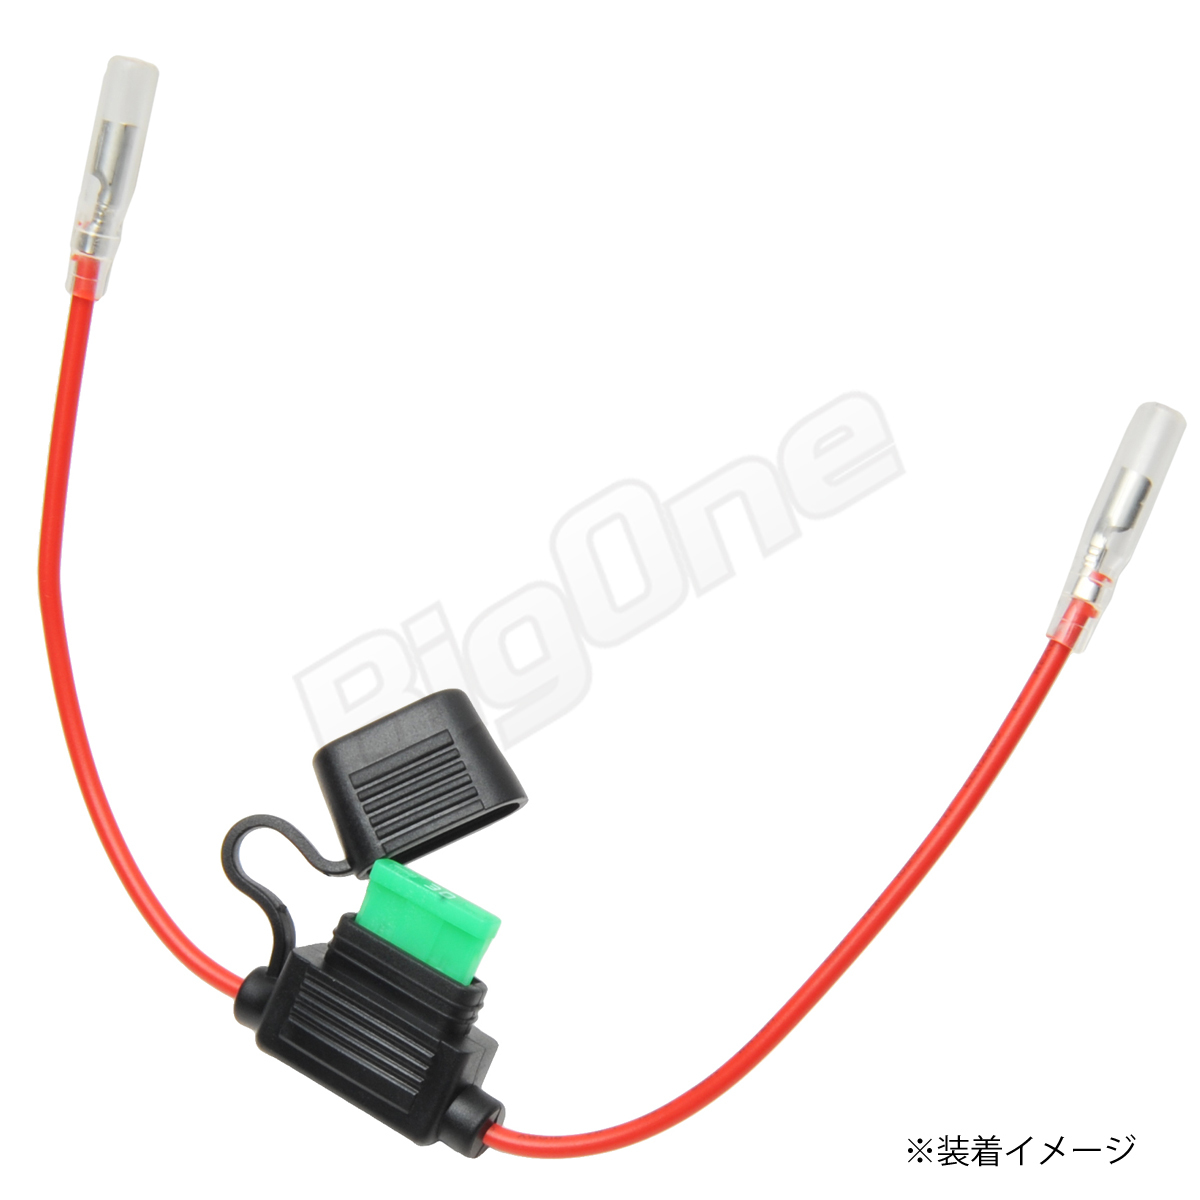 BigOne standard flat type fuse holder ATP box cap connector code attaching wiring LED chigar lighter ETC drive recorder. connection 